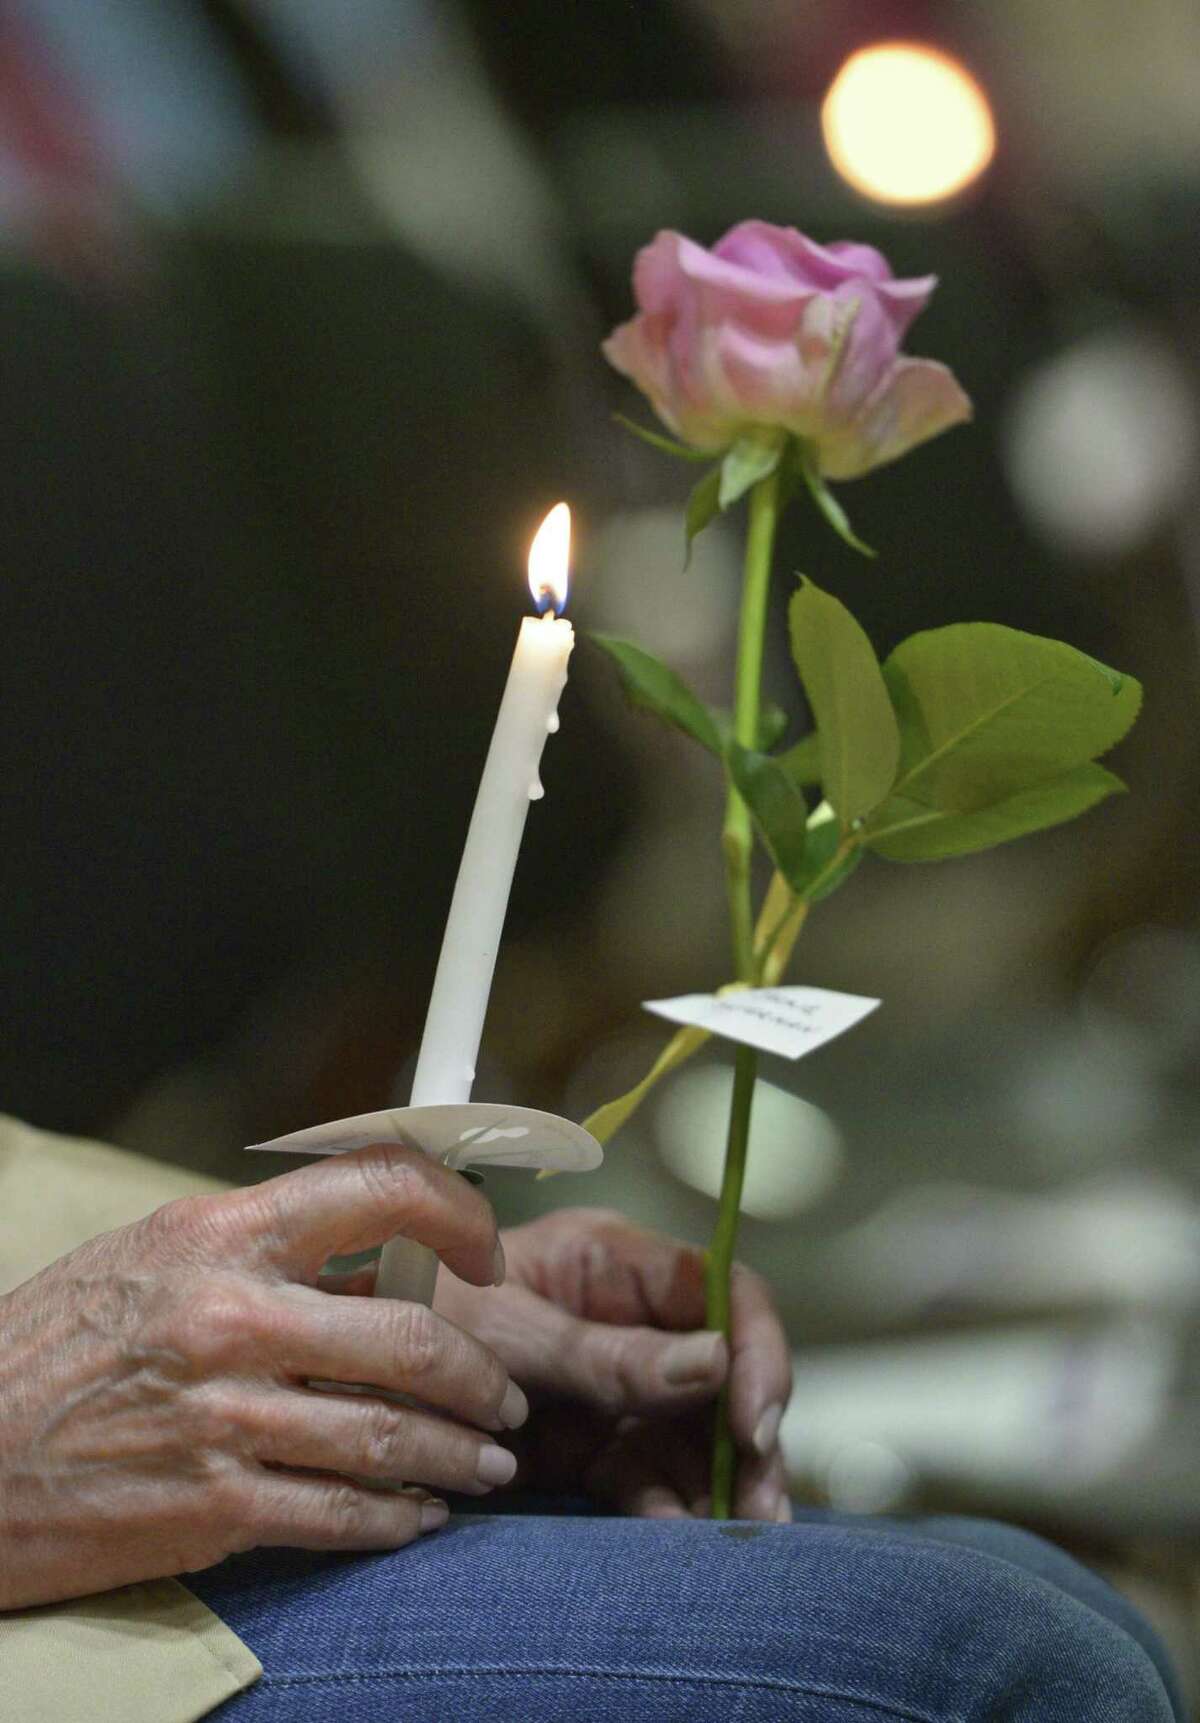 YWCA Greenwich will host its Annual Candlelight Vigil and Art Show from 6:30 to 8 p.m. Tuesday at its home at 259 E. Putnam Ave. The event is a tribute to survivors of domestic abuse and the volunteers who give their time and talent to help survivors. The organization will also memorialize Connecticut victims who lost their lives this past year to their abusers. The event is free and open to the public. October is Domestic Abuse Violence Awareness Month.